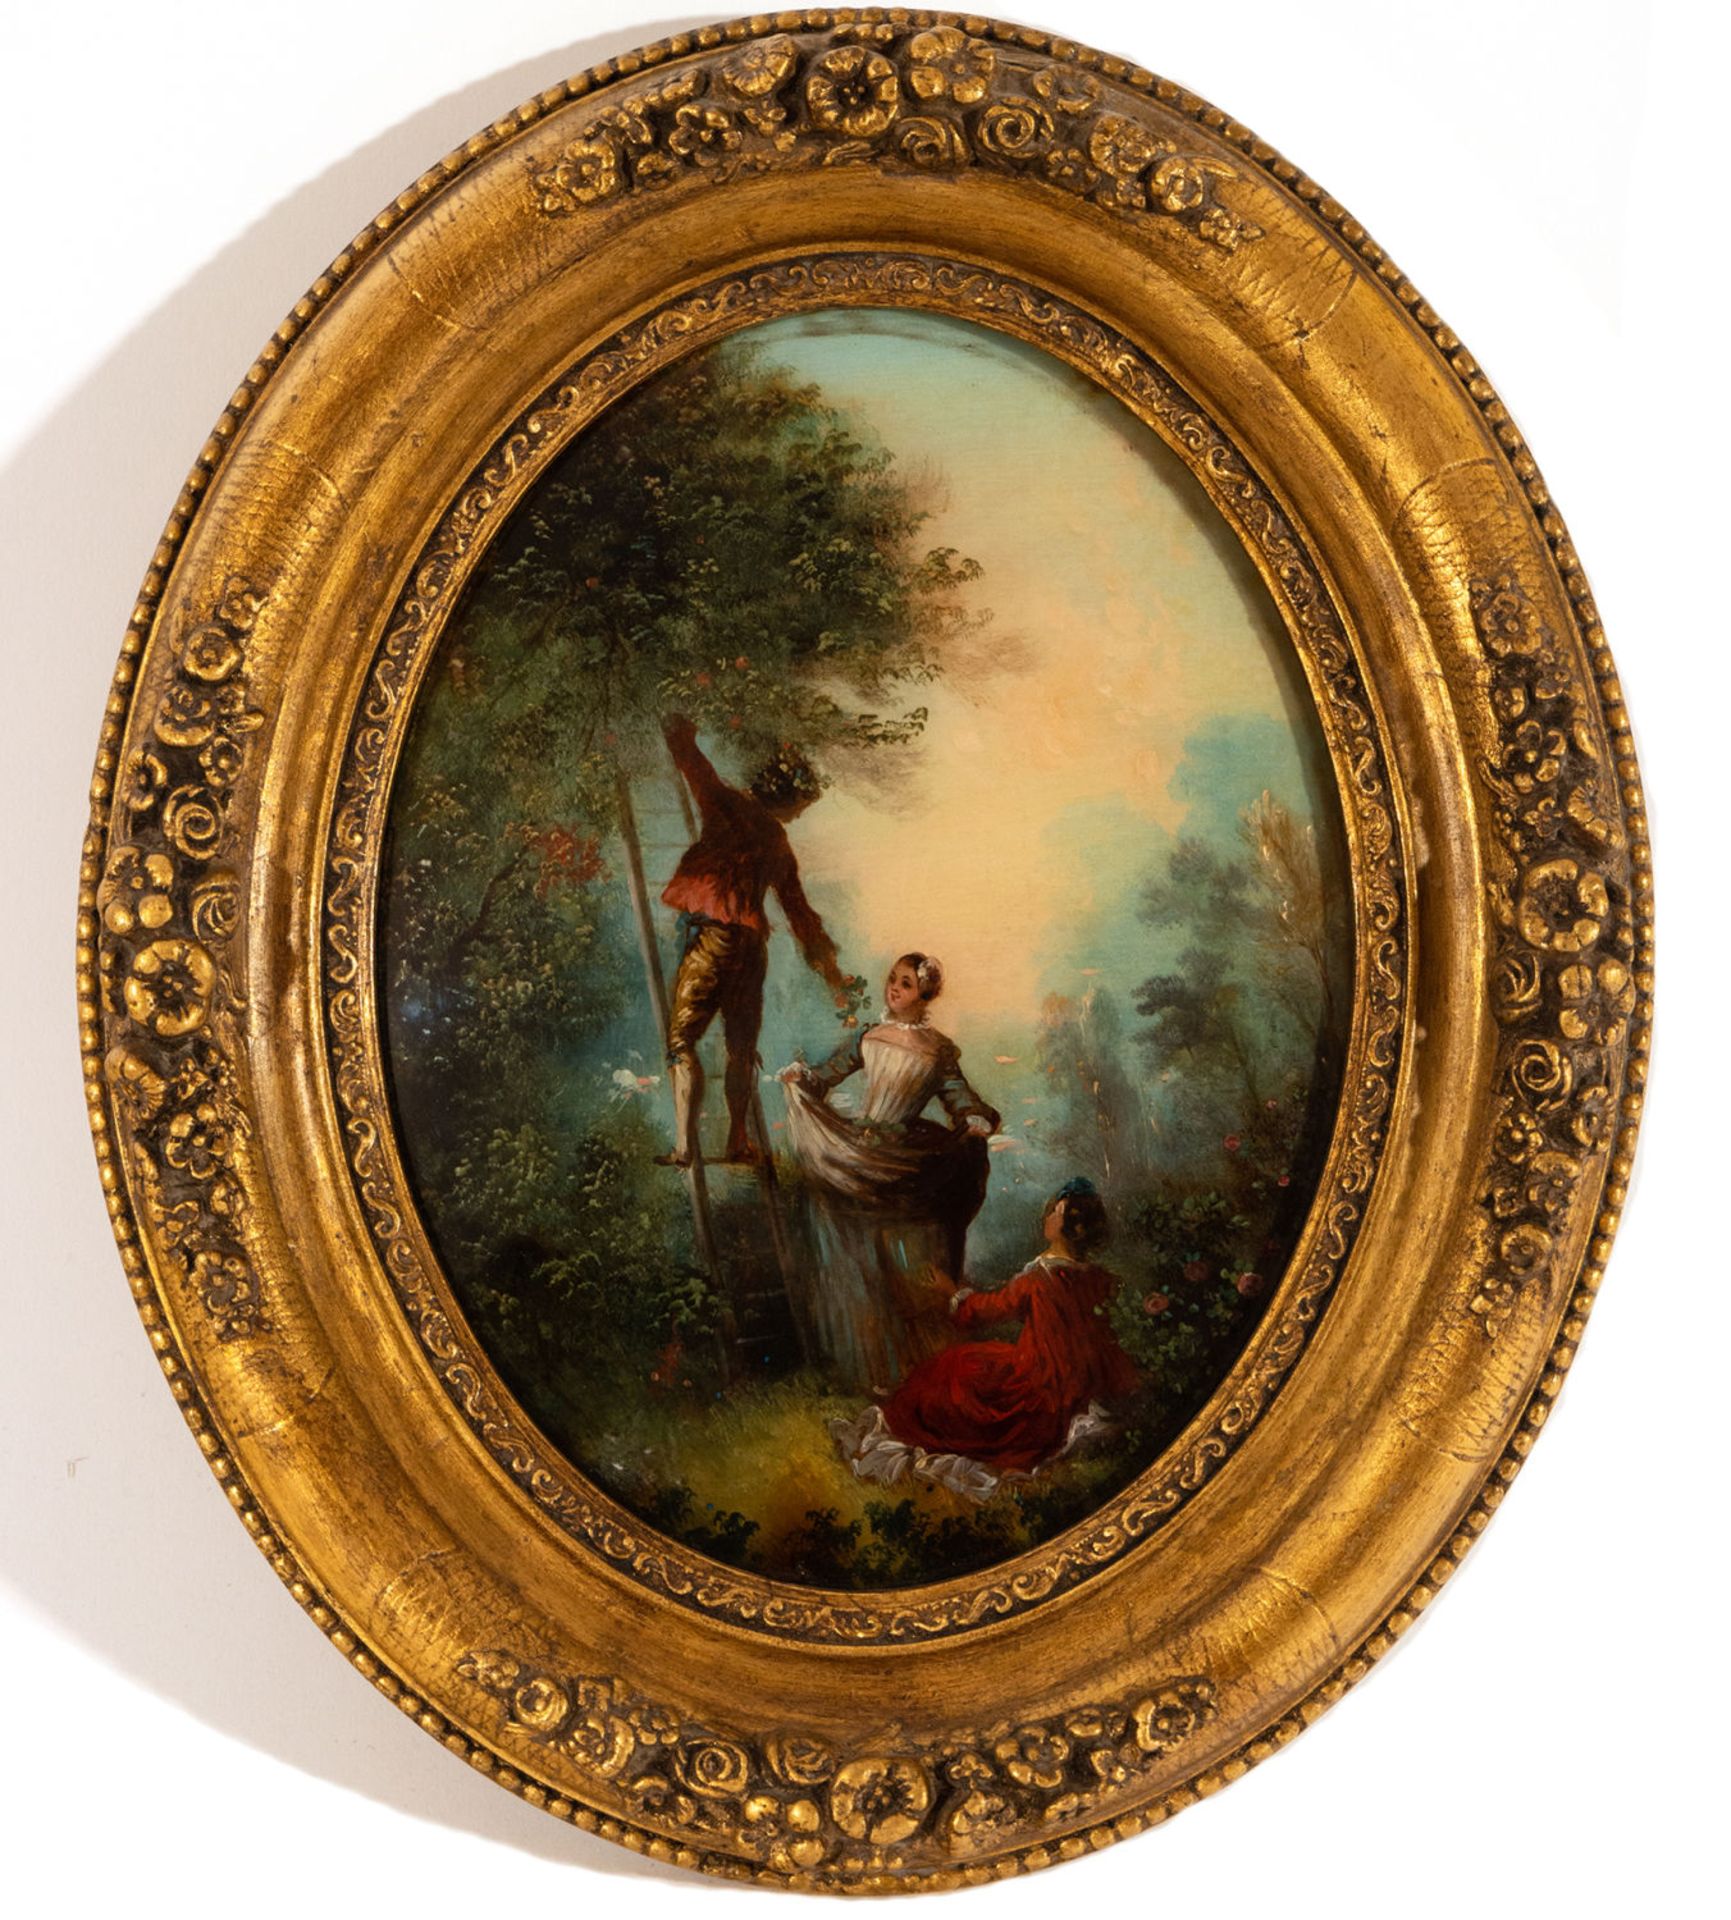 Beautiful Oval in glass painted with a Galante scene, France, 19th century